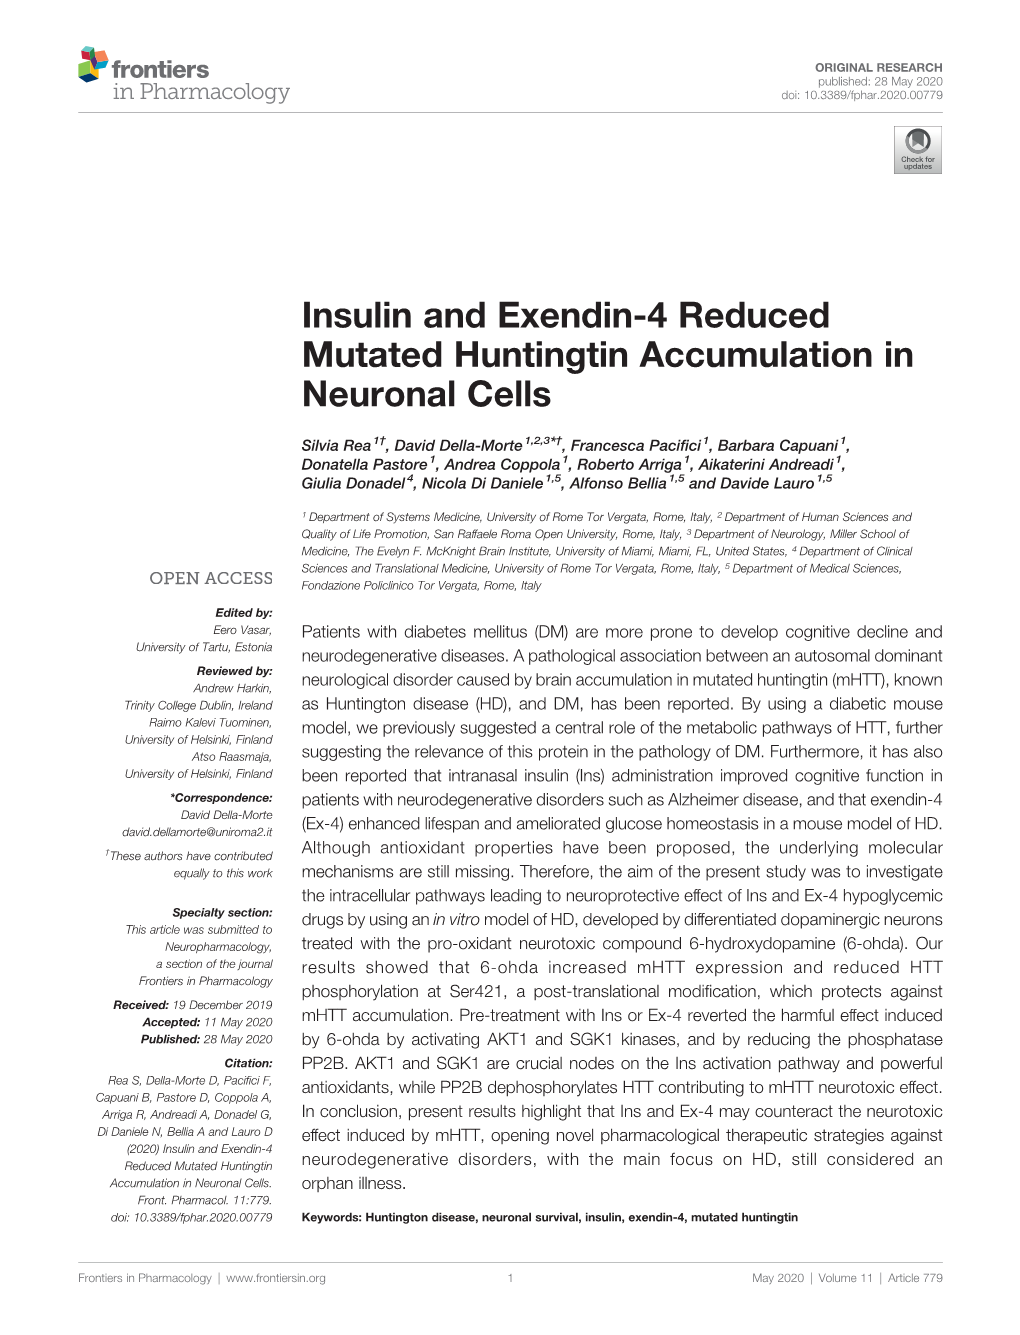 Insulin and Exendin-4 Reduced Mutated Huntingtin Accumulation in Neuronal Cells